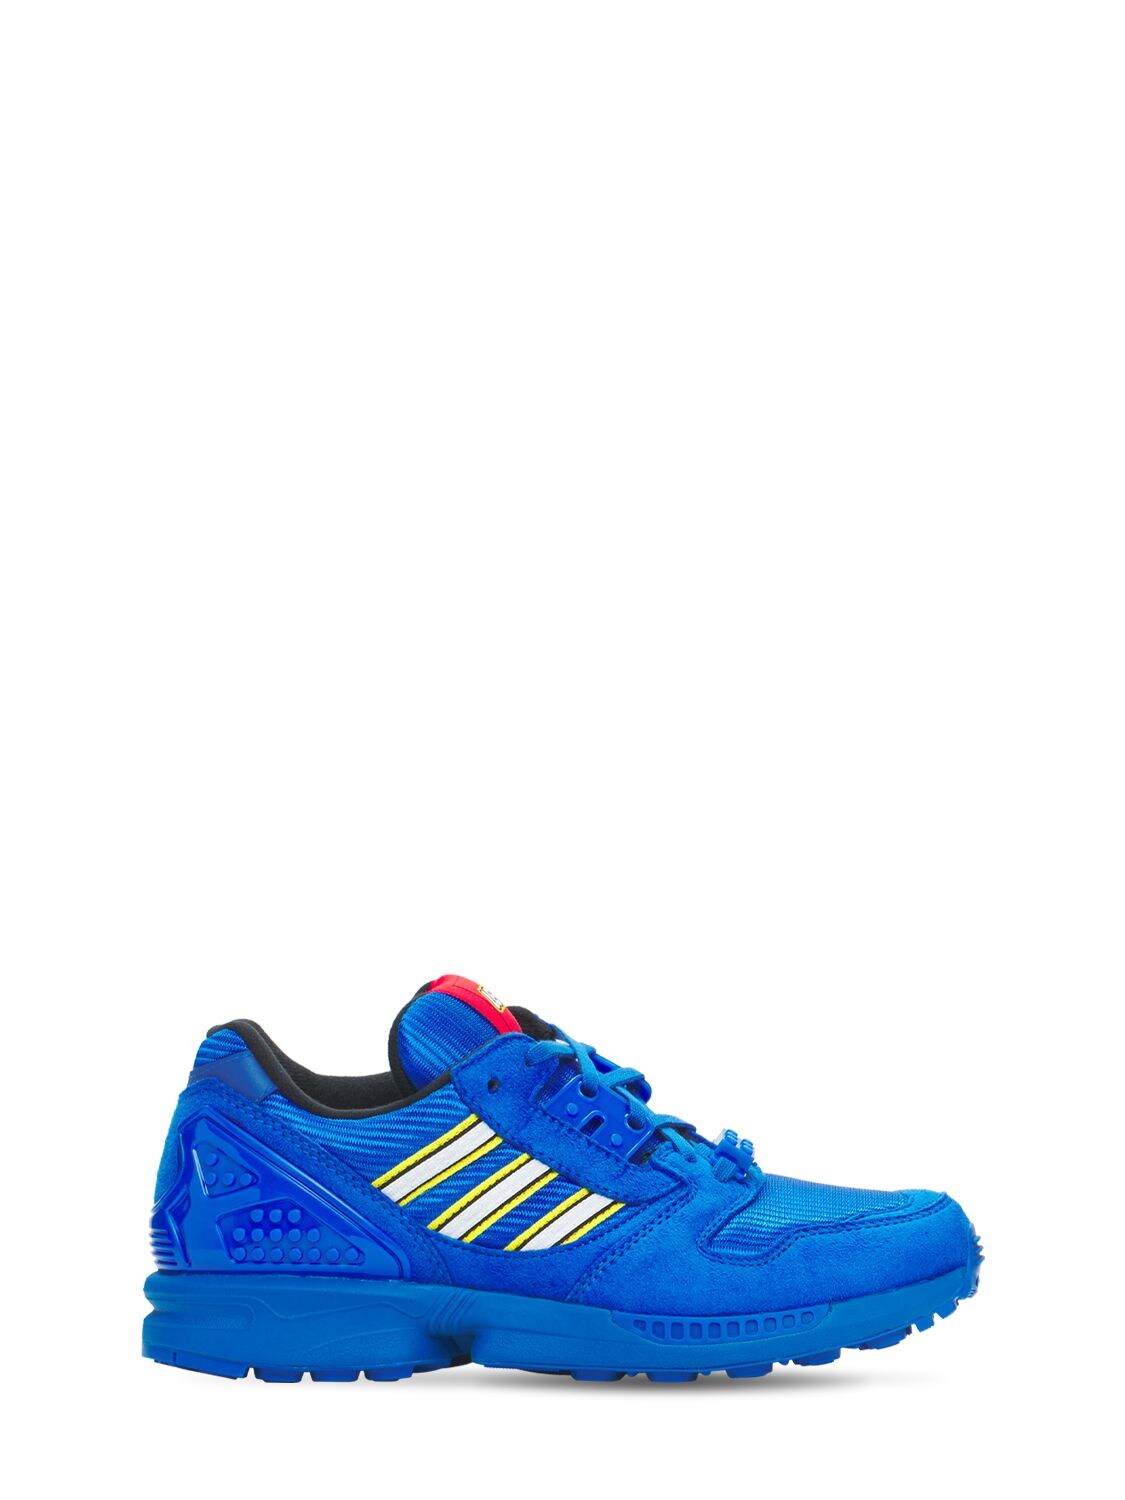 Zx 8000 J Lego Sneakers from ADIDAS ORIGINALS | AccuWeather Shop